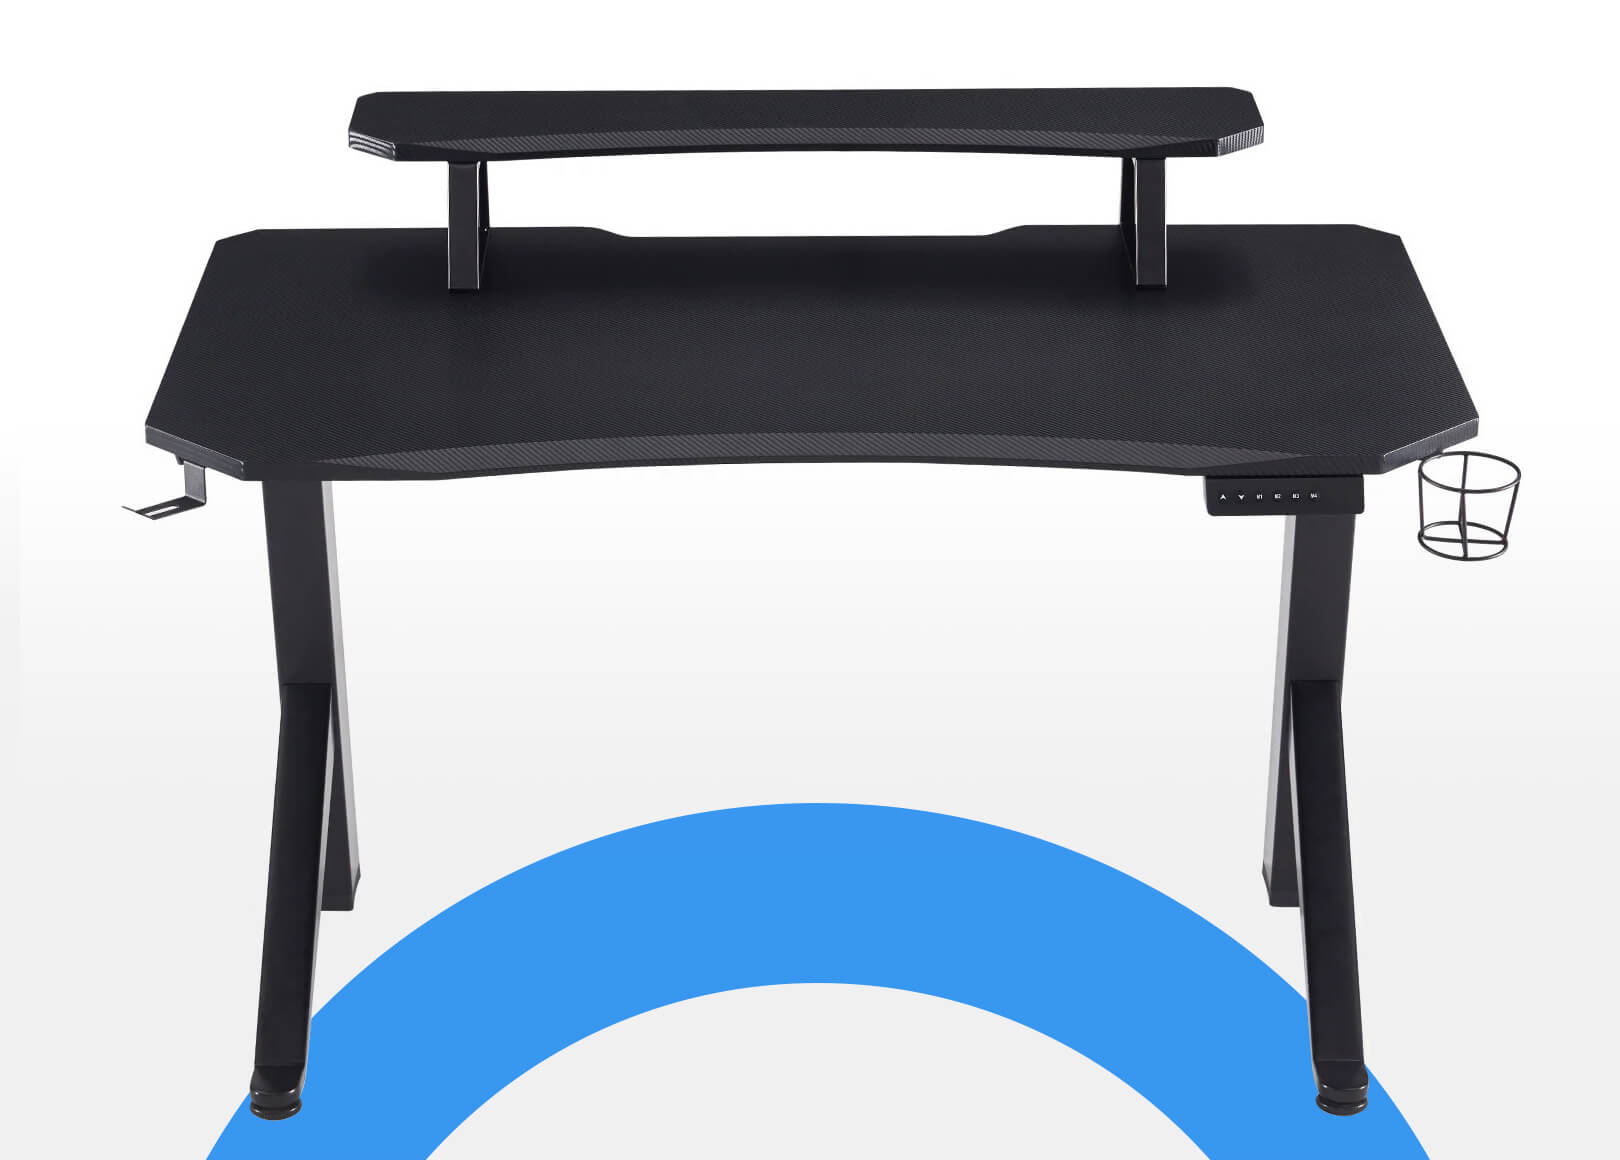 Super Cool and Ergonomic Carved Desktop Sunaofe Gaming Standing Desk Challenger with monitor Stander with earphone hooker and water cup holder to help users to enjoy the gaming pleasure